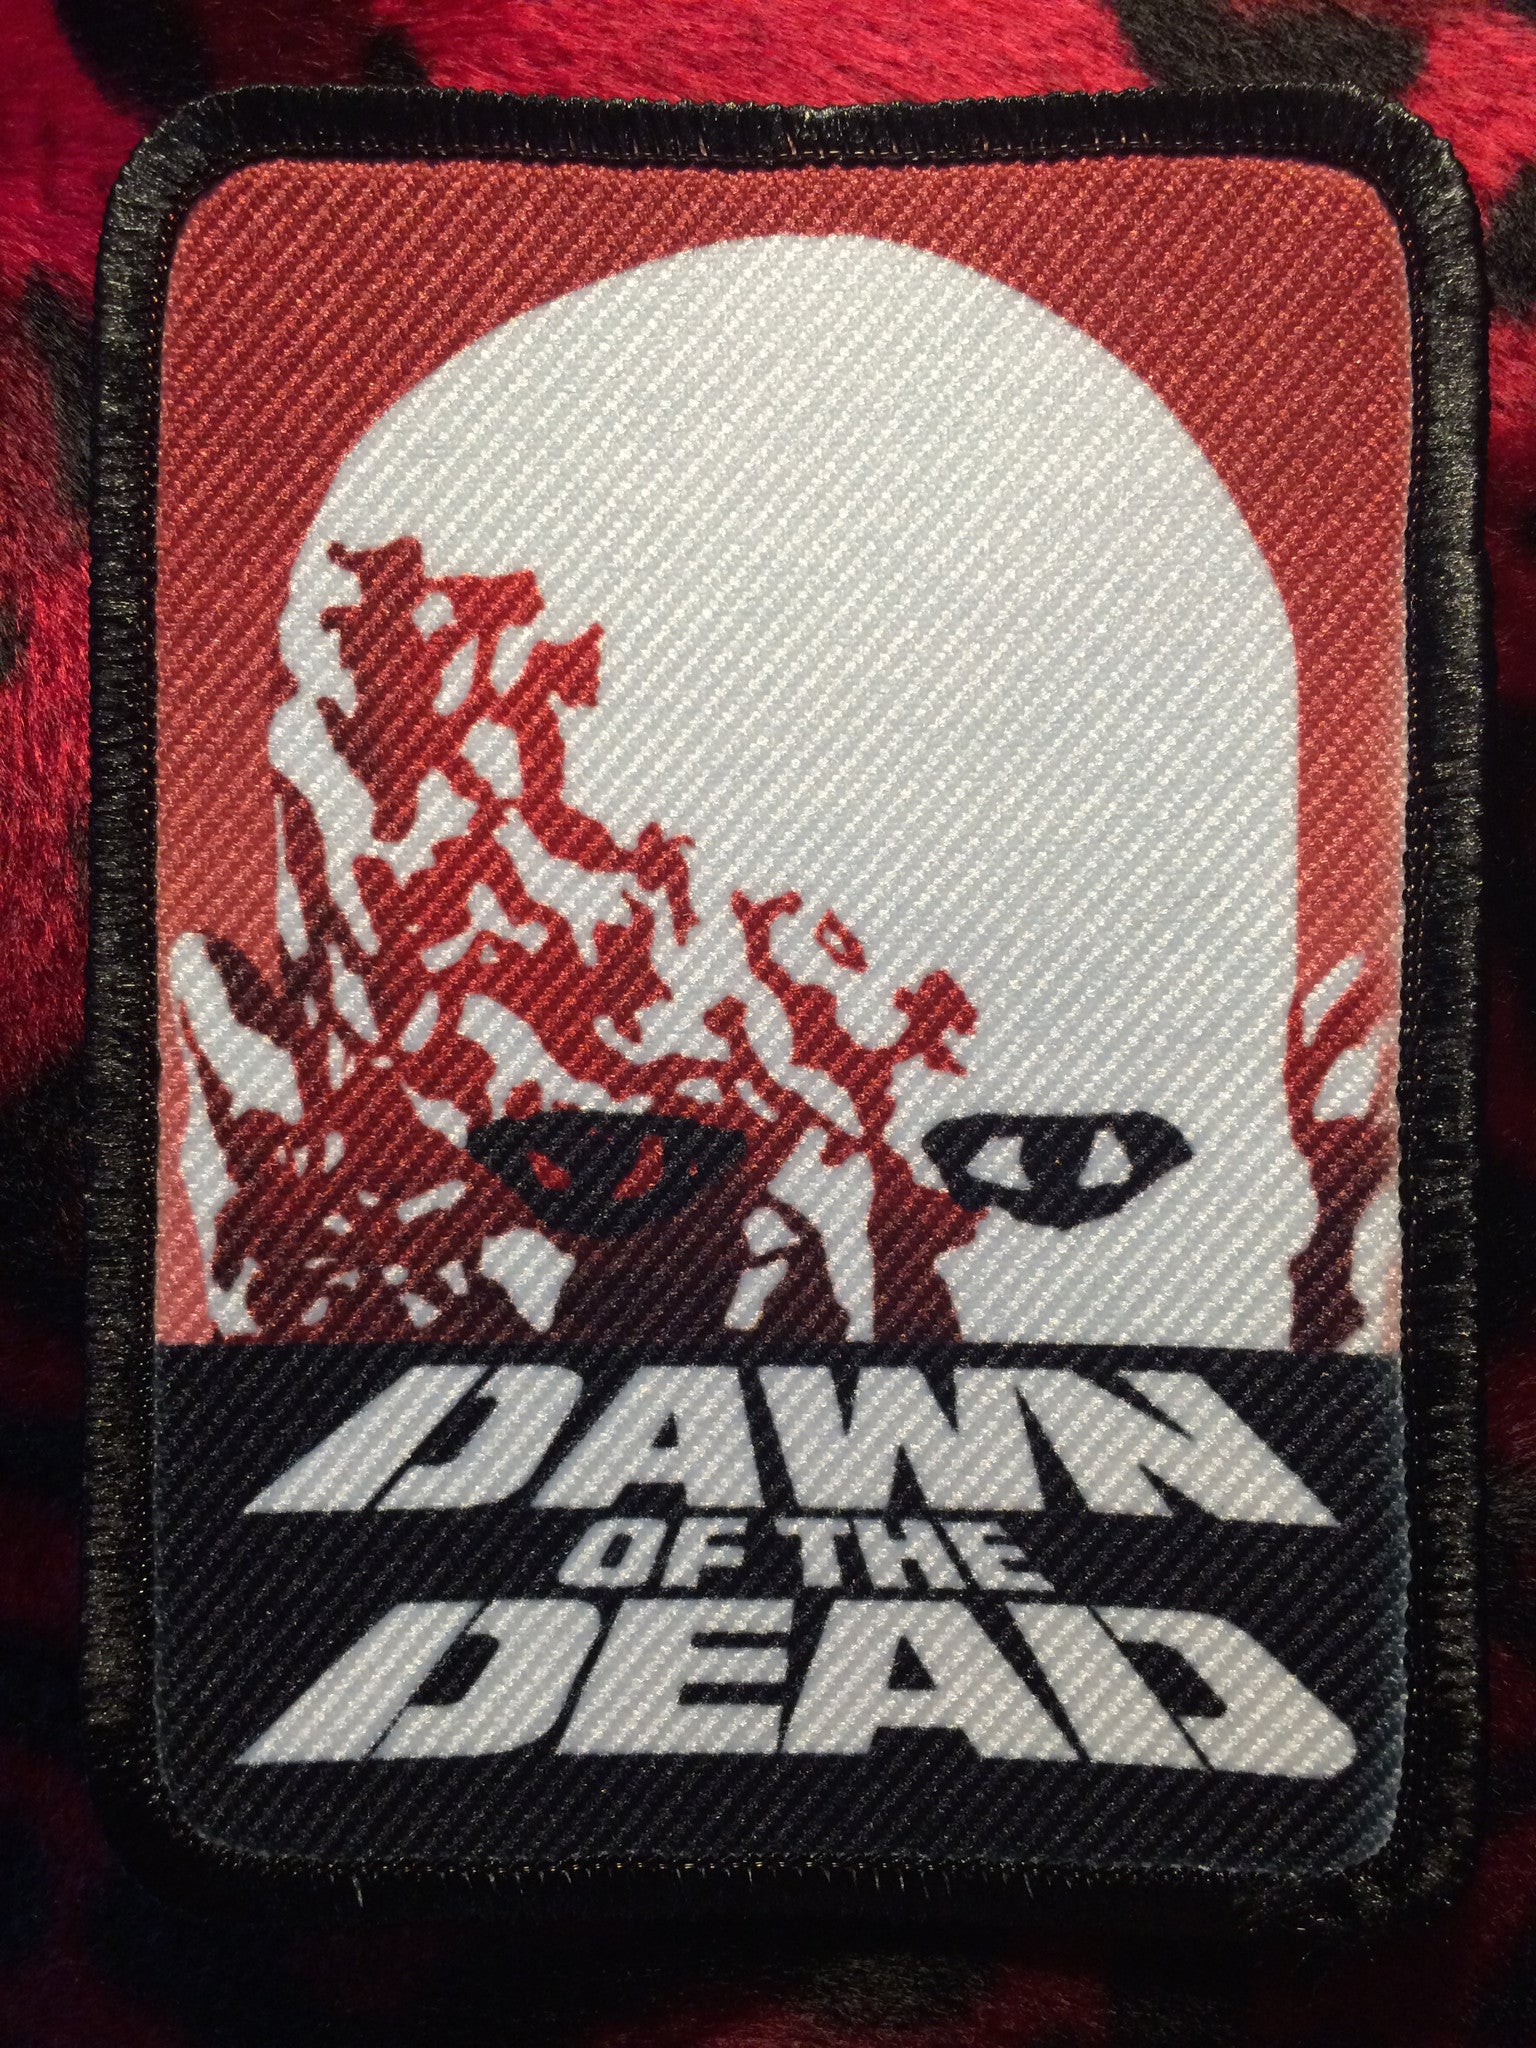 Dawn of the Dead Style A Patch